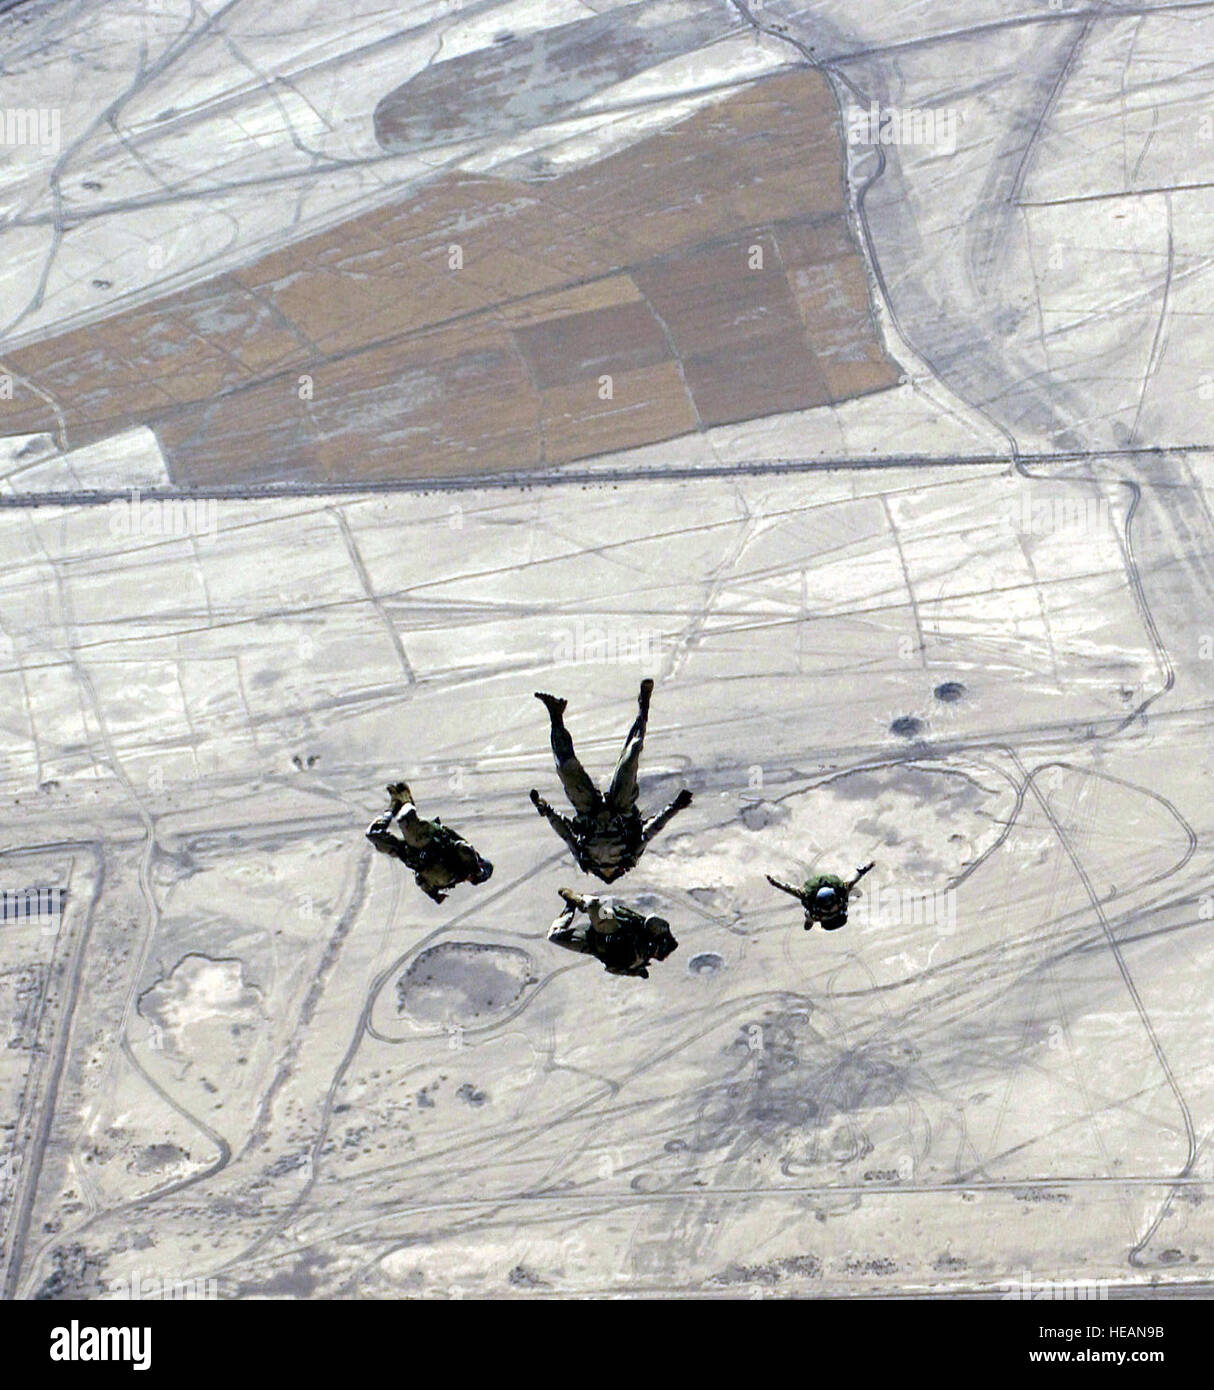 US Air Force Reserve Pararescuemen assigned to the 301st Rescue Squadron, perform a high altitude low opening parachute jump over Tallil Air Base, Iraq, during Operation Iraqi Freedom. Staff Sgt. Shane Cuomo) Stock Photo